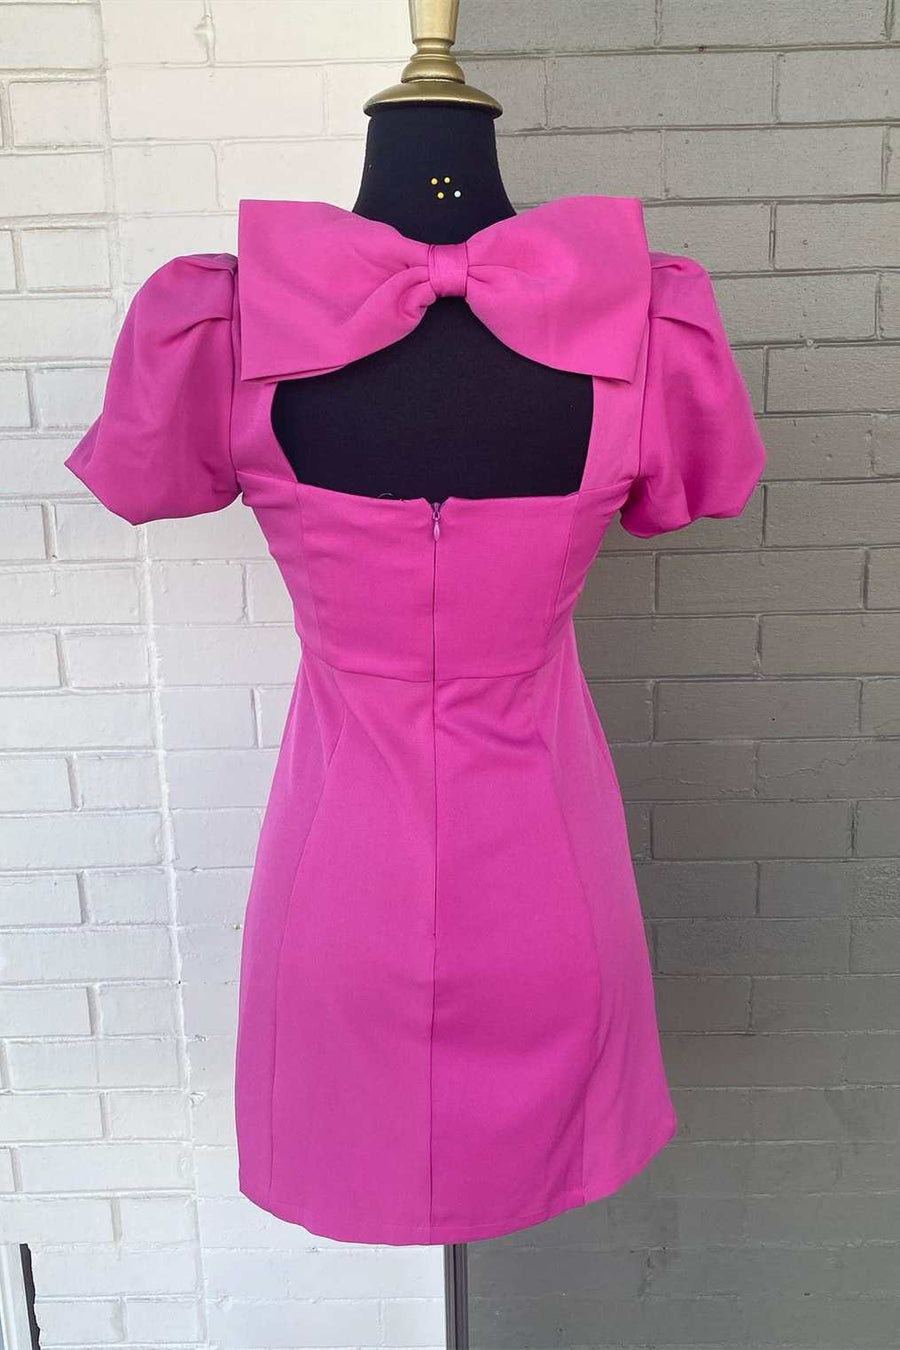 Neon Pink Bow-Back Puff Sleeve Short Homecoming Dress